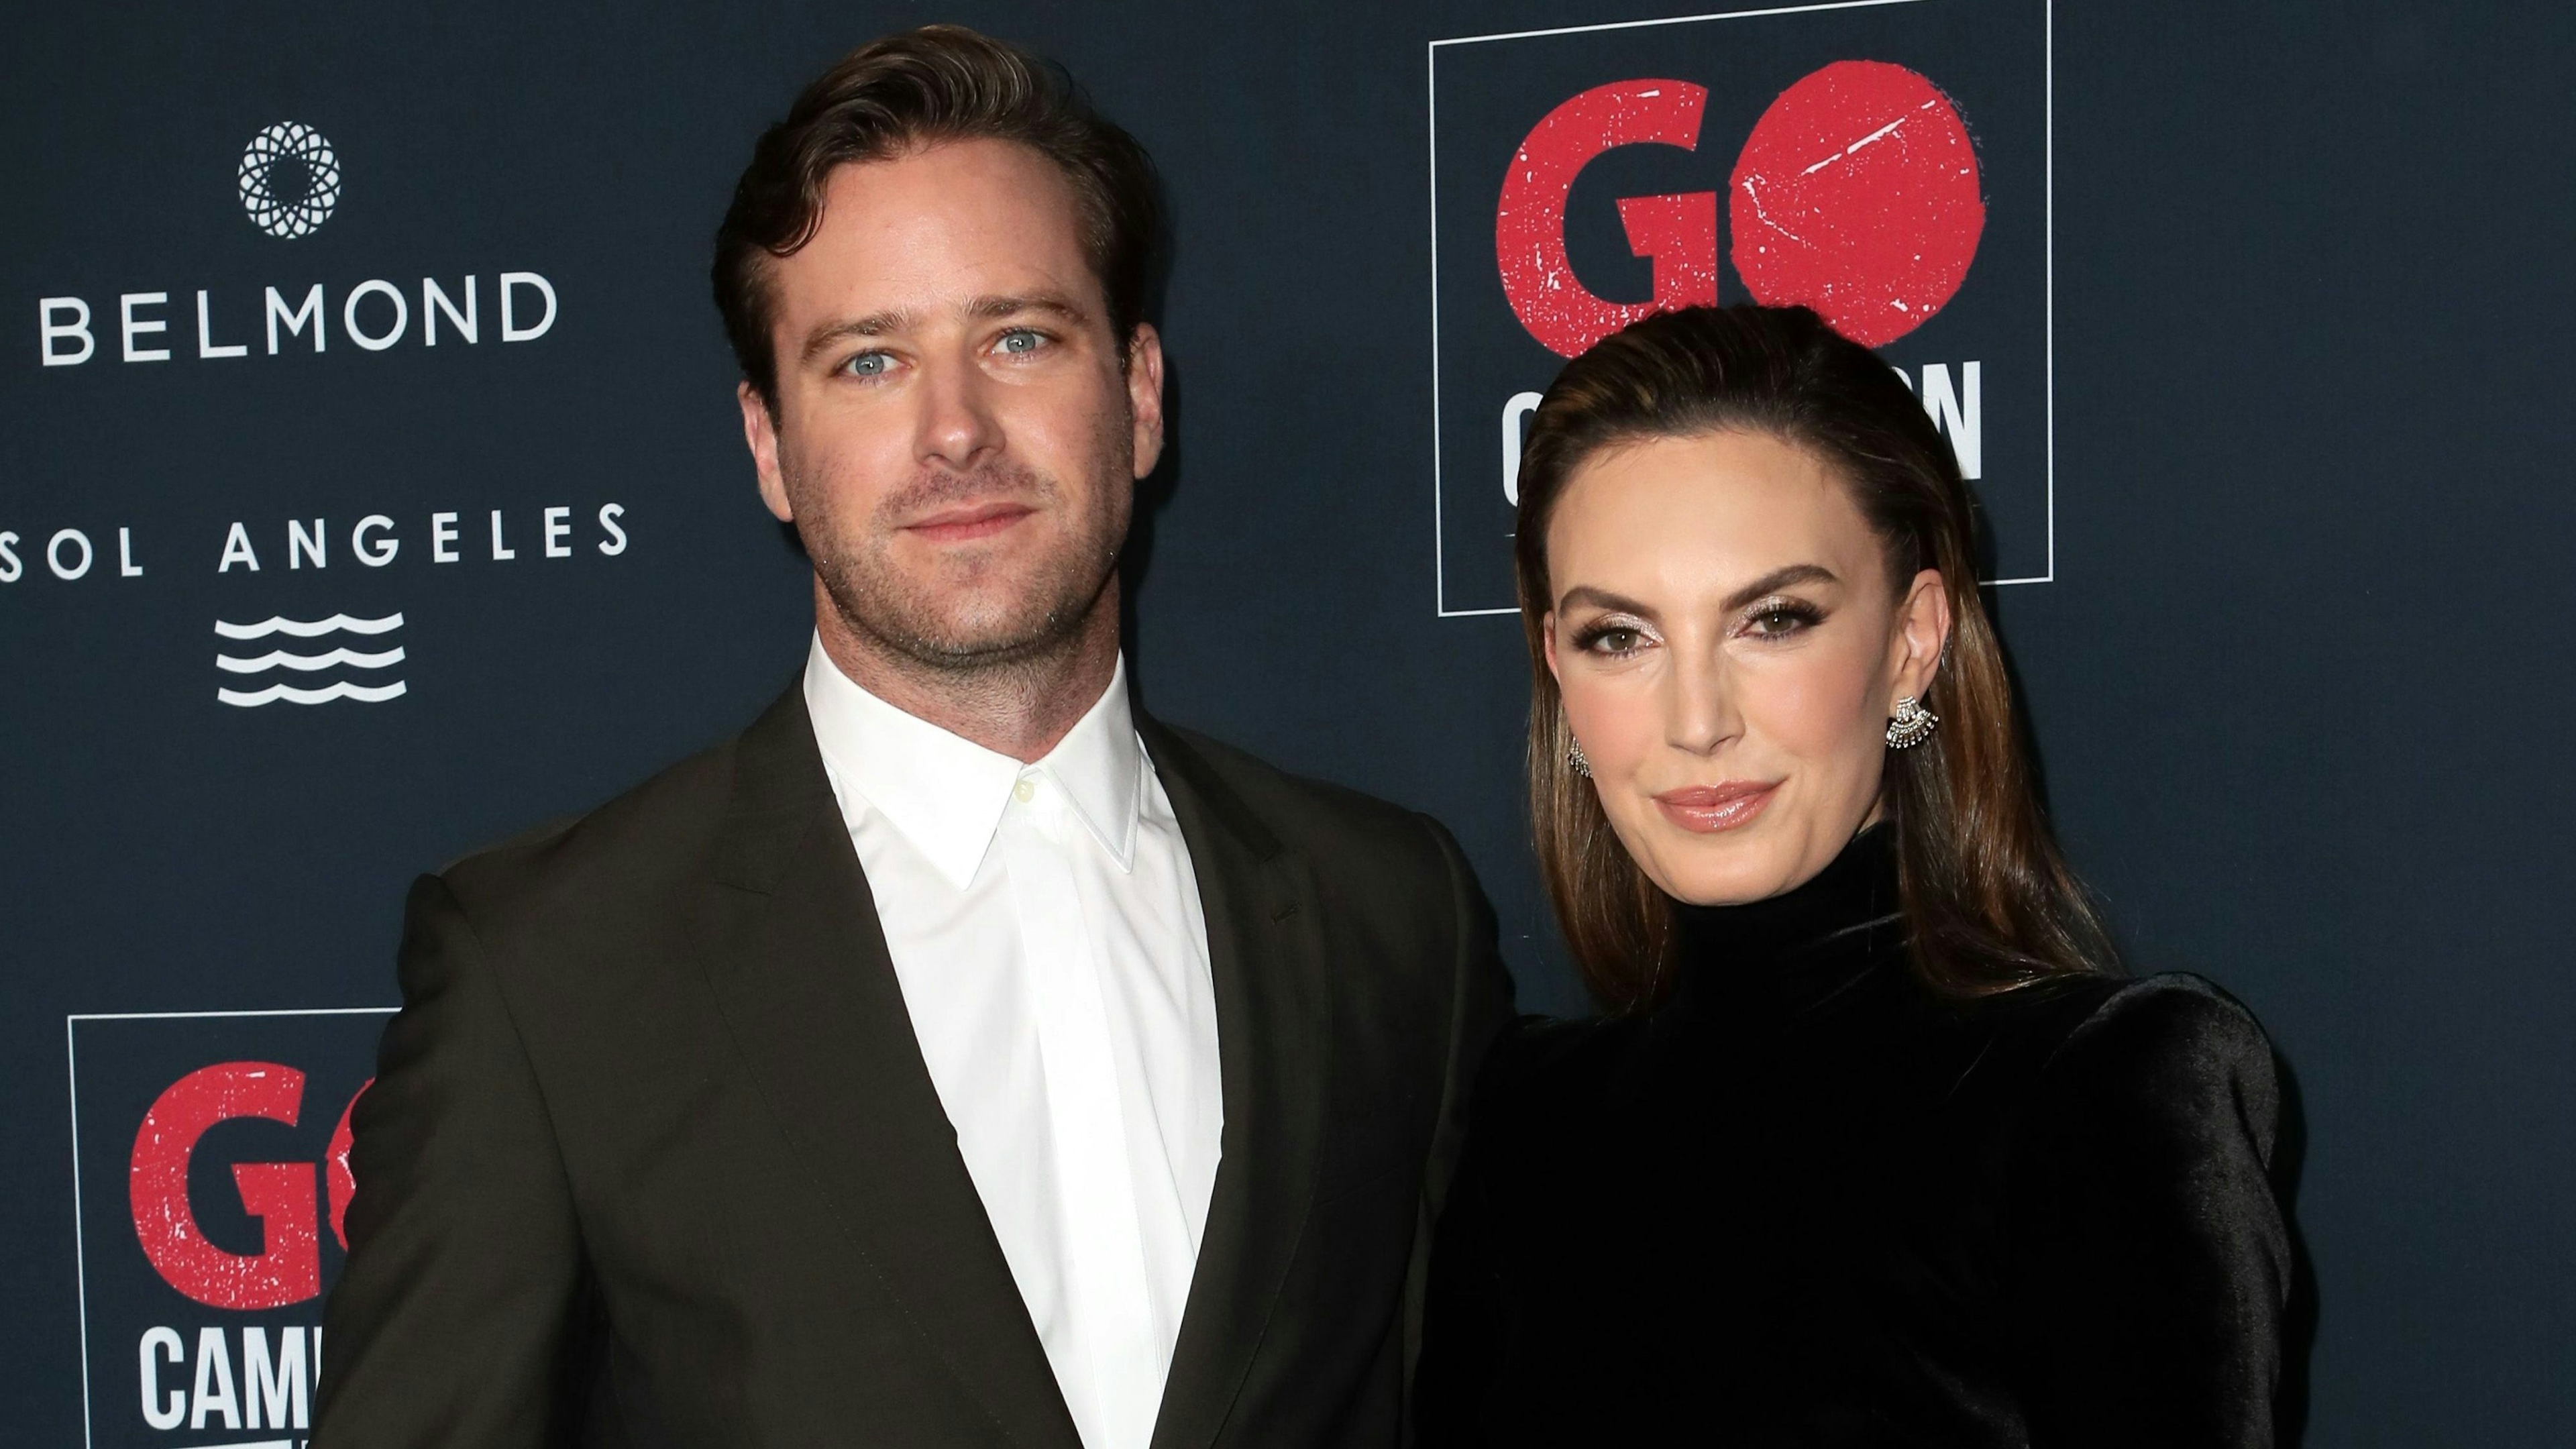 Armie Hammer and Elizabeth Chambers attend the Go Campaign's 13th Annual Go Gala at NeueHouse Hollywood on November 16, 2019 in Los Angeles, California.